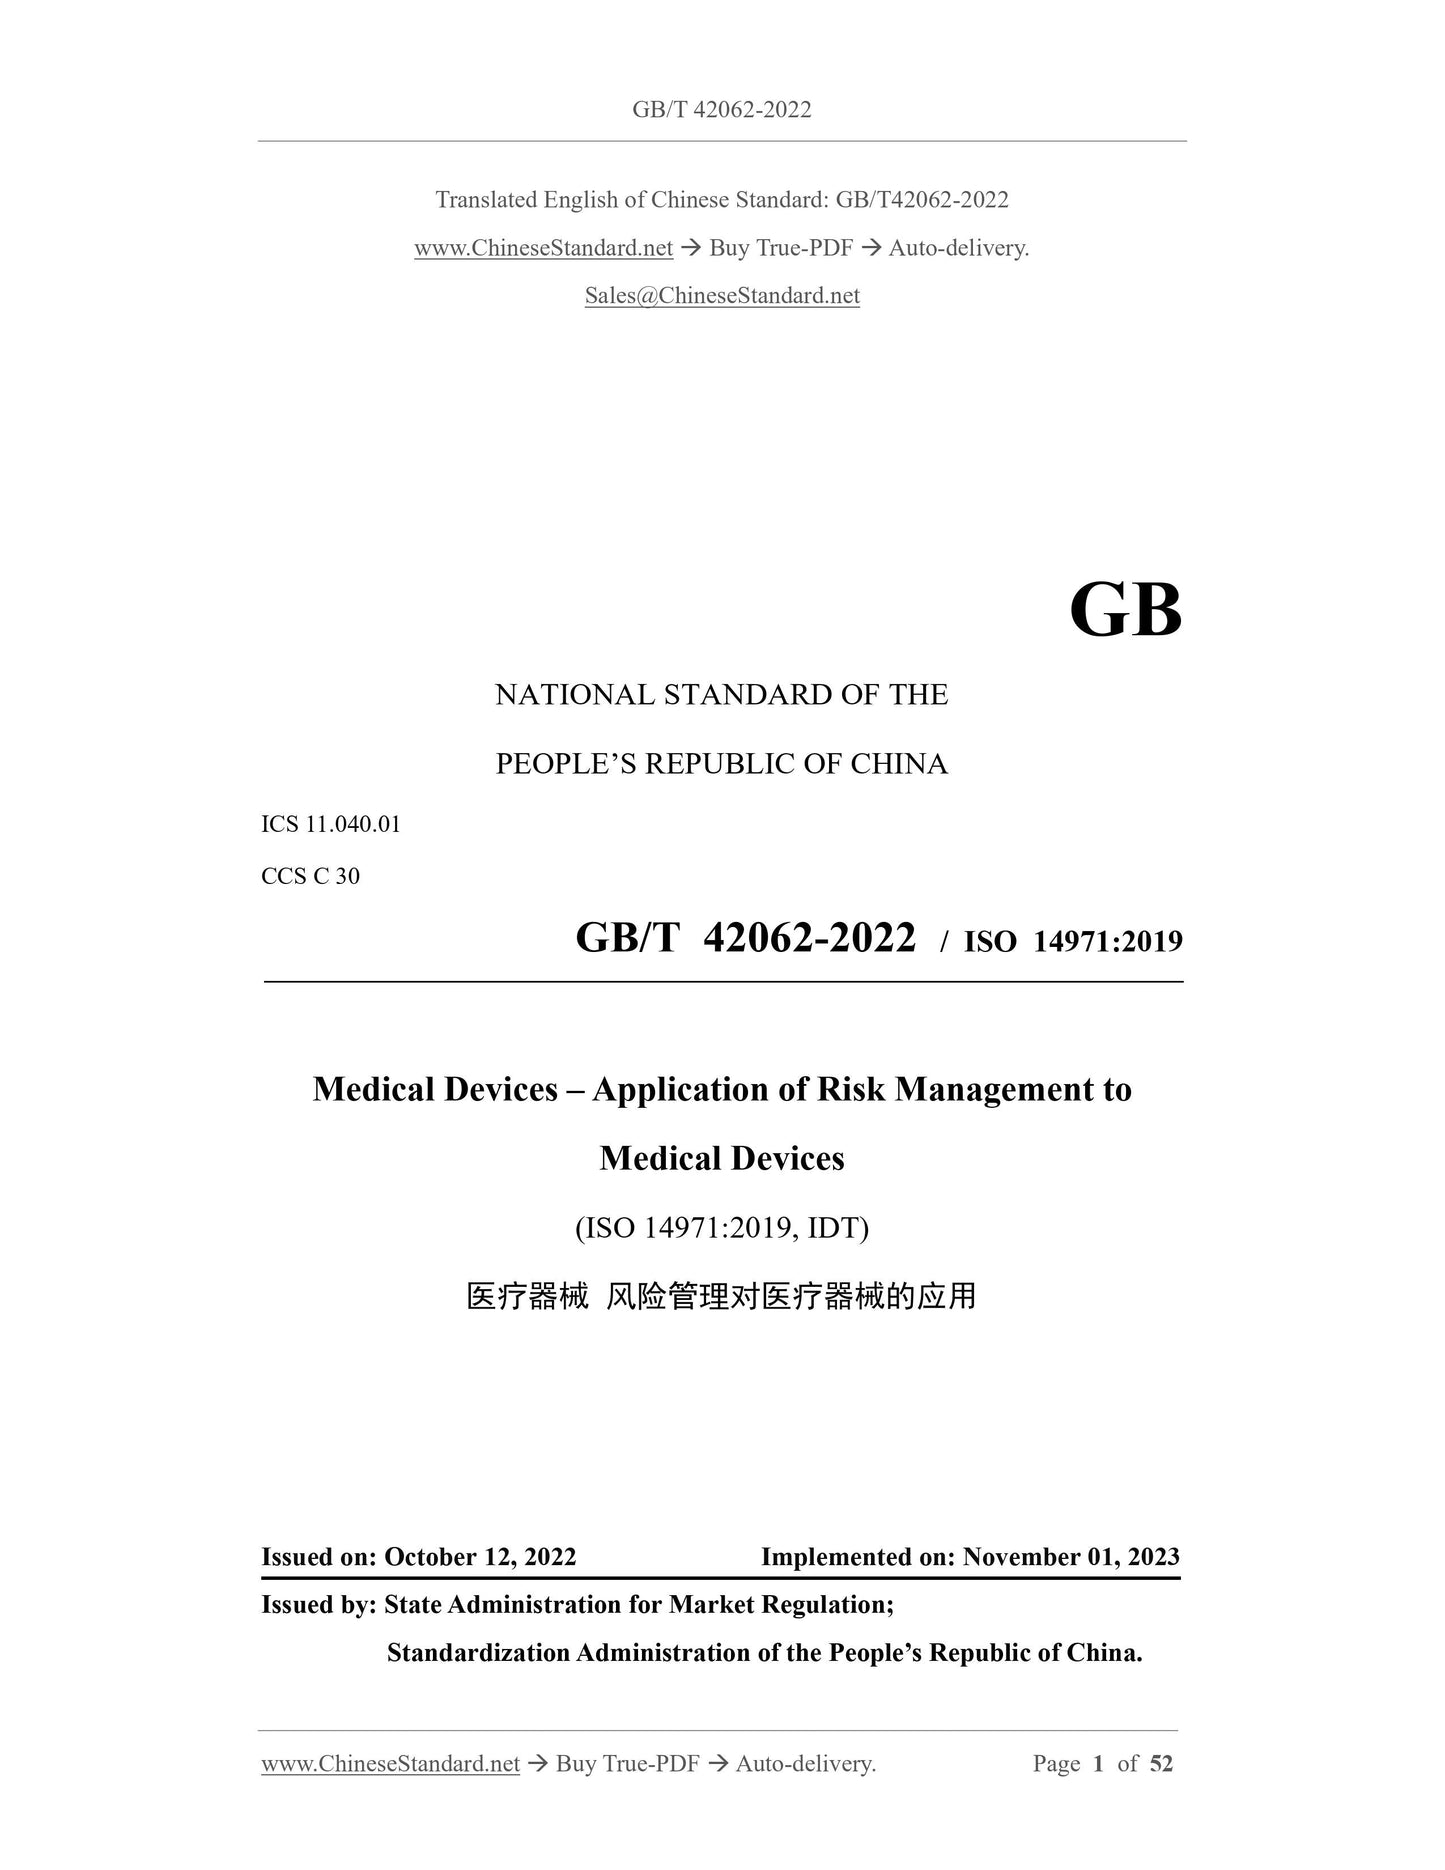 GB/T 42062-2022 Page 1